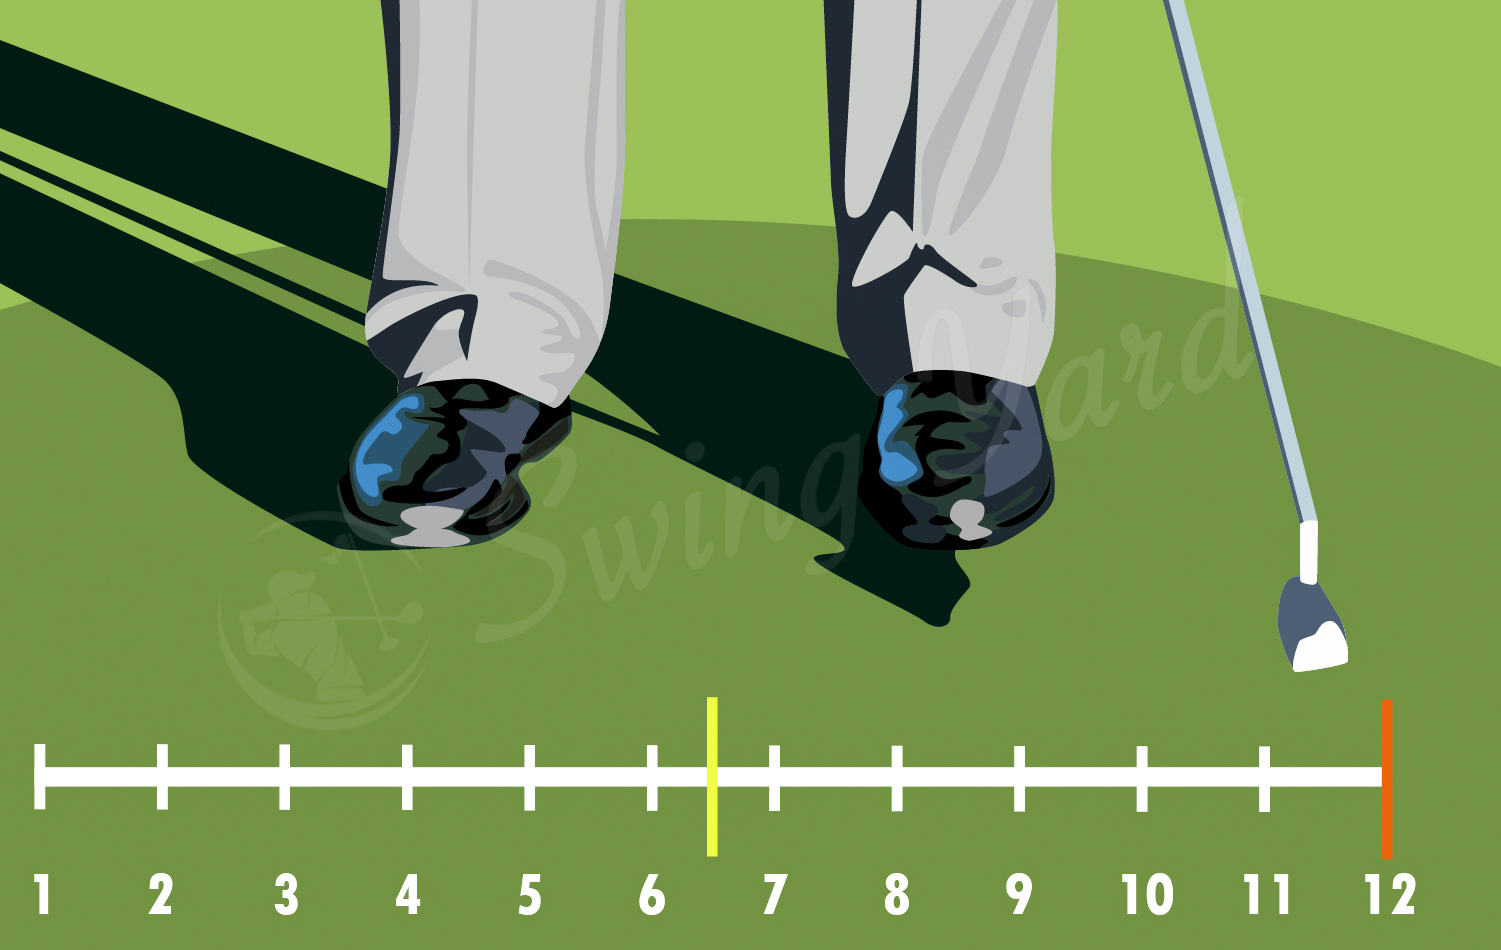 Showing the length of a lag putting backswing